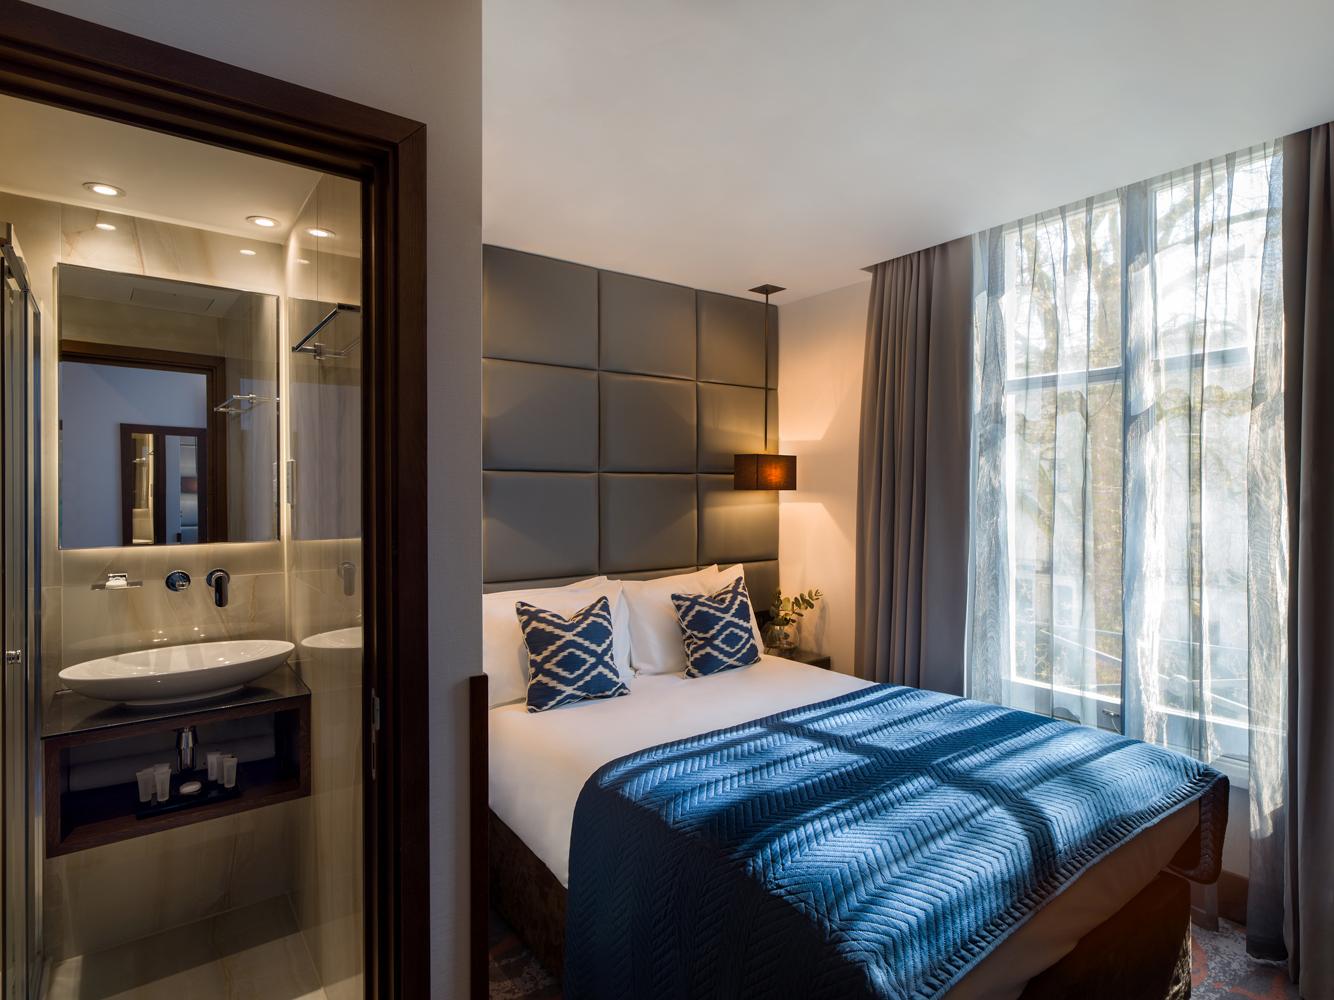 The Chilworth is set inside a refurbished Georgian townhouse near Paddington station and Hyde Park / 